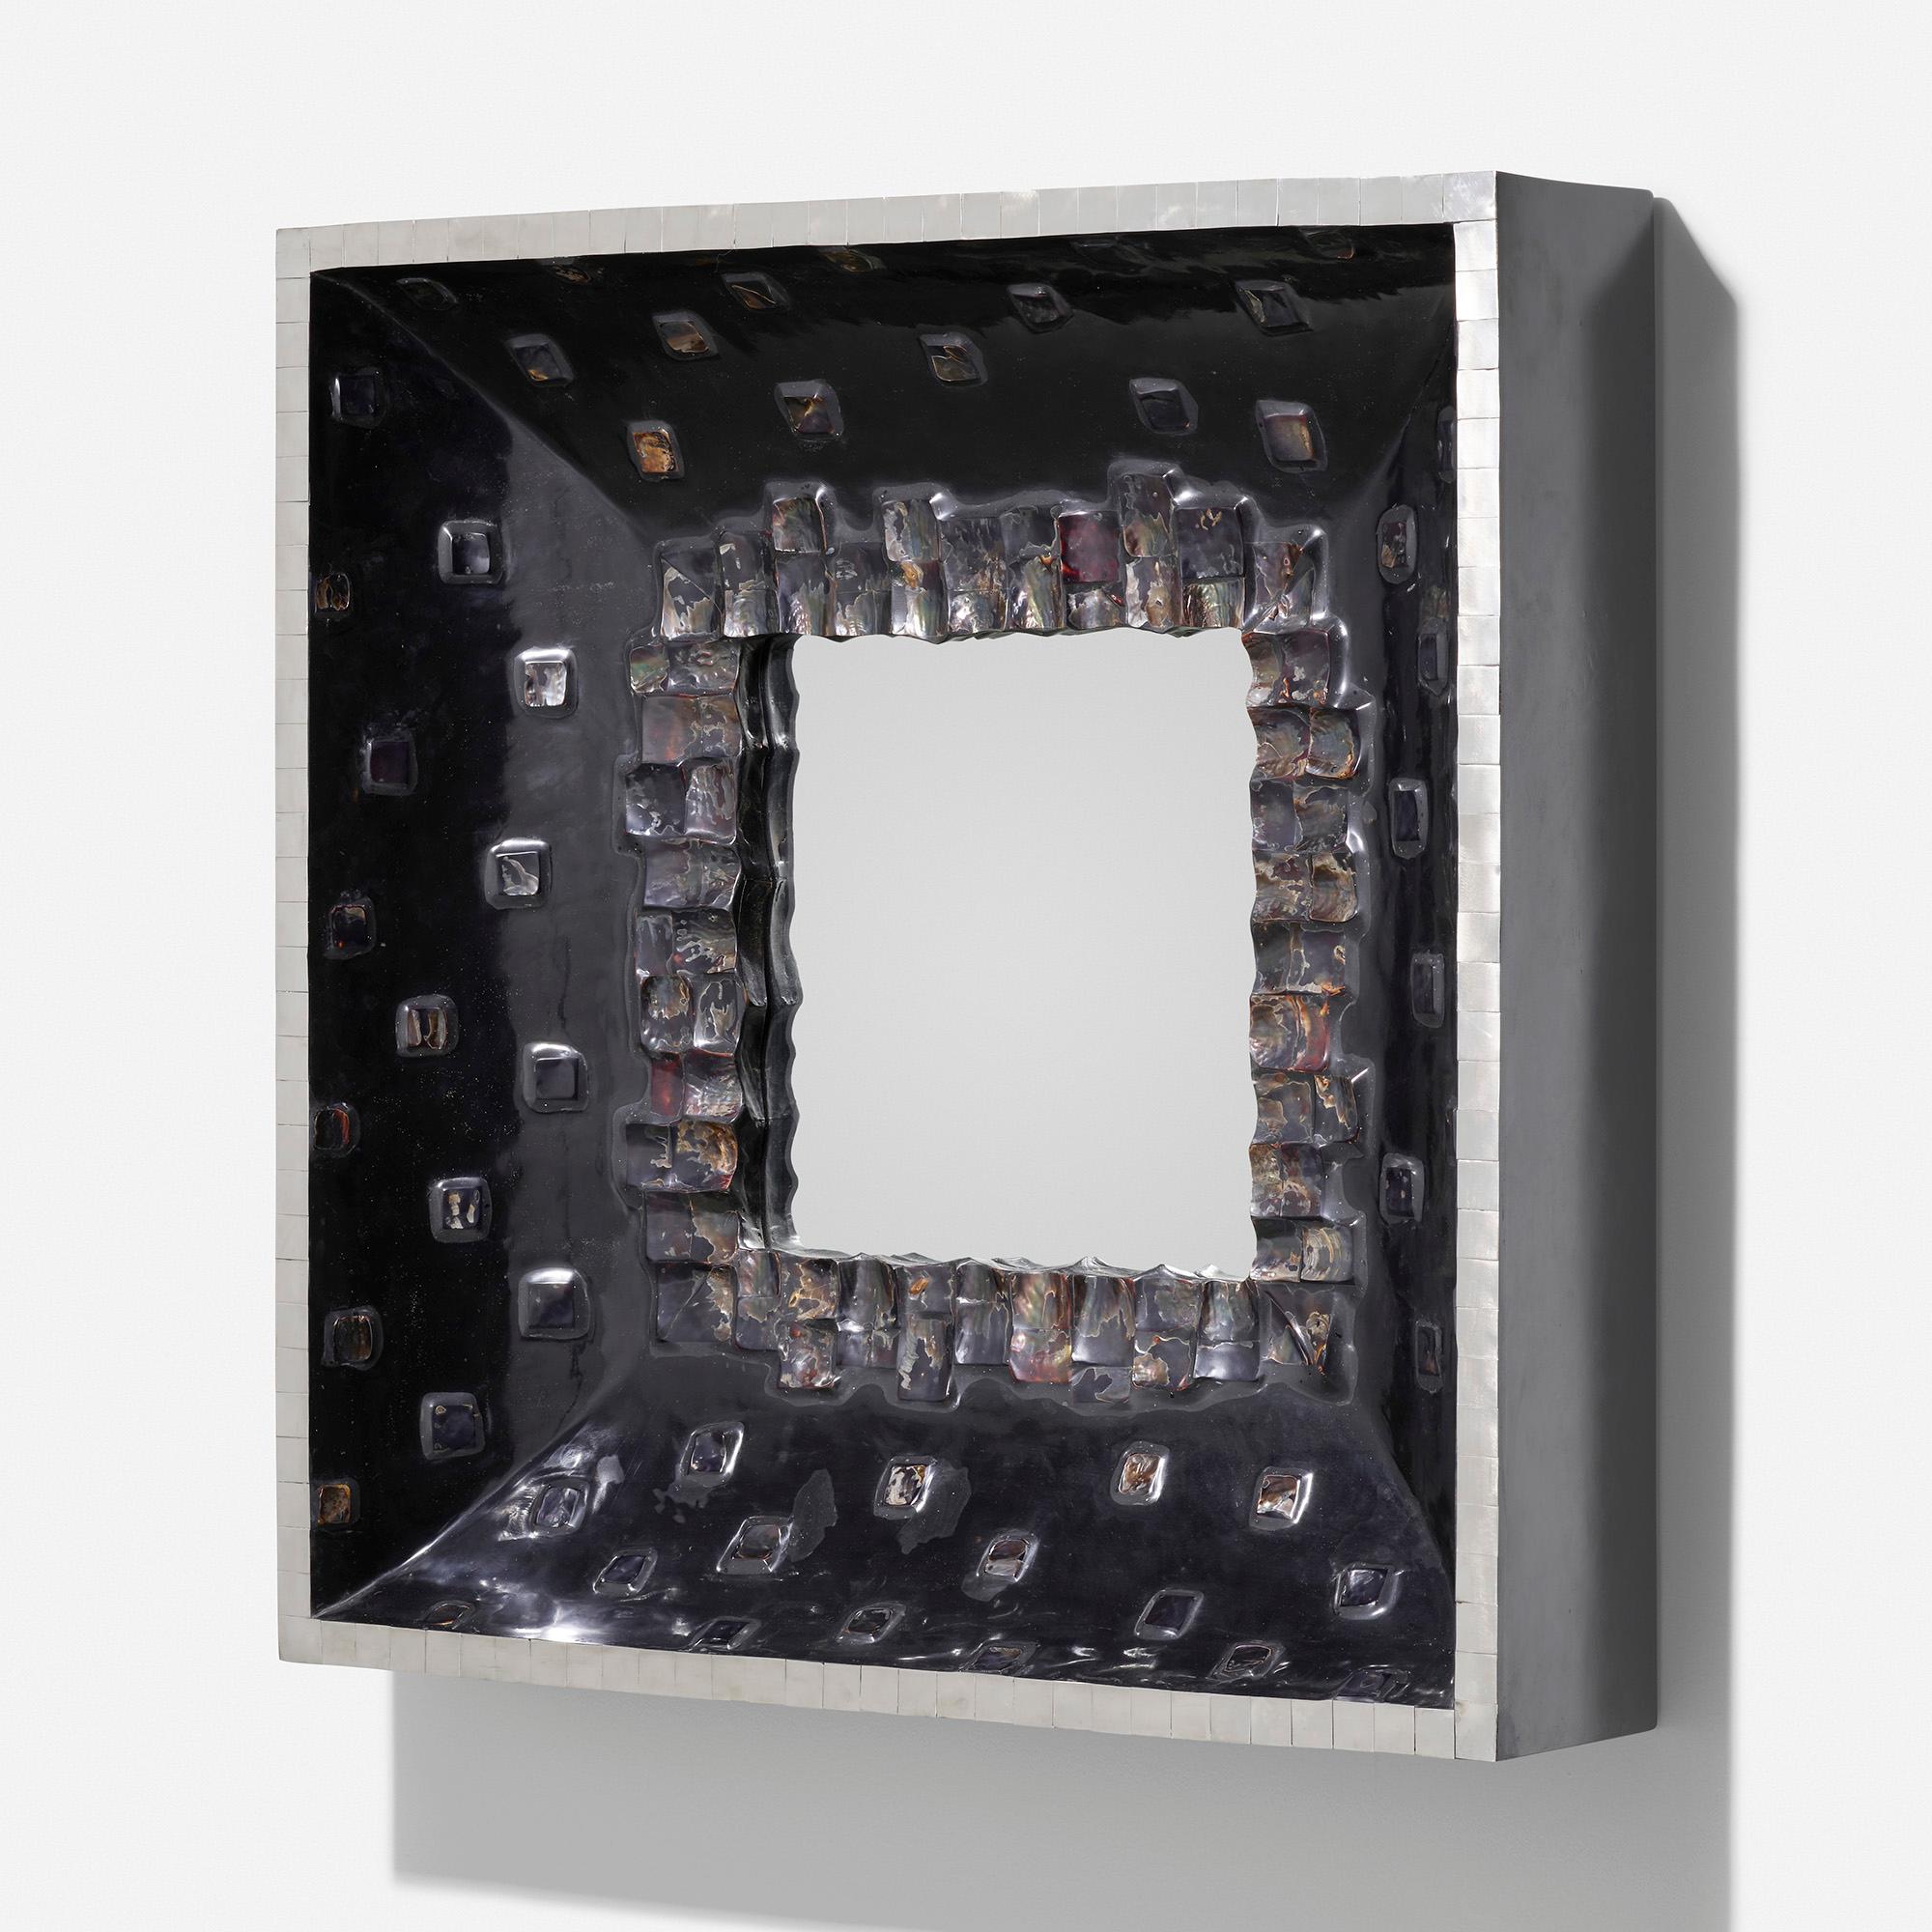 Created: c. 1965

Material: abalone, mirrored glass, painted resin, aluminum

Size: 35.5 W × 7.25 D × 35.5 H in.